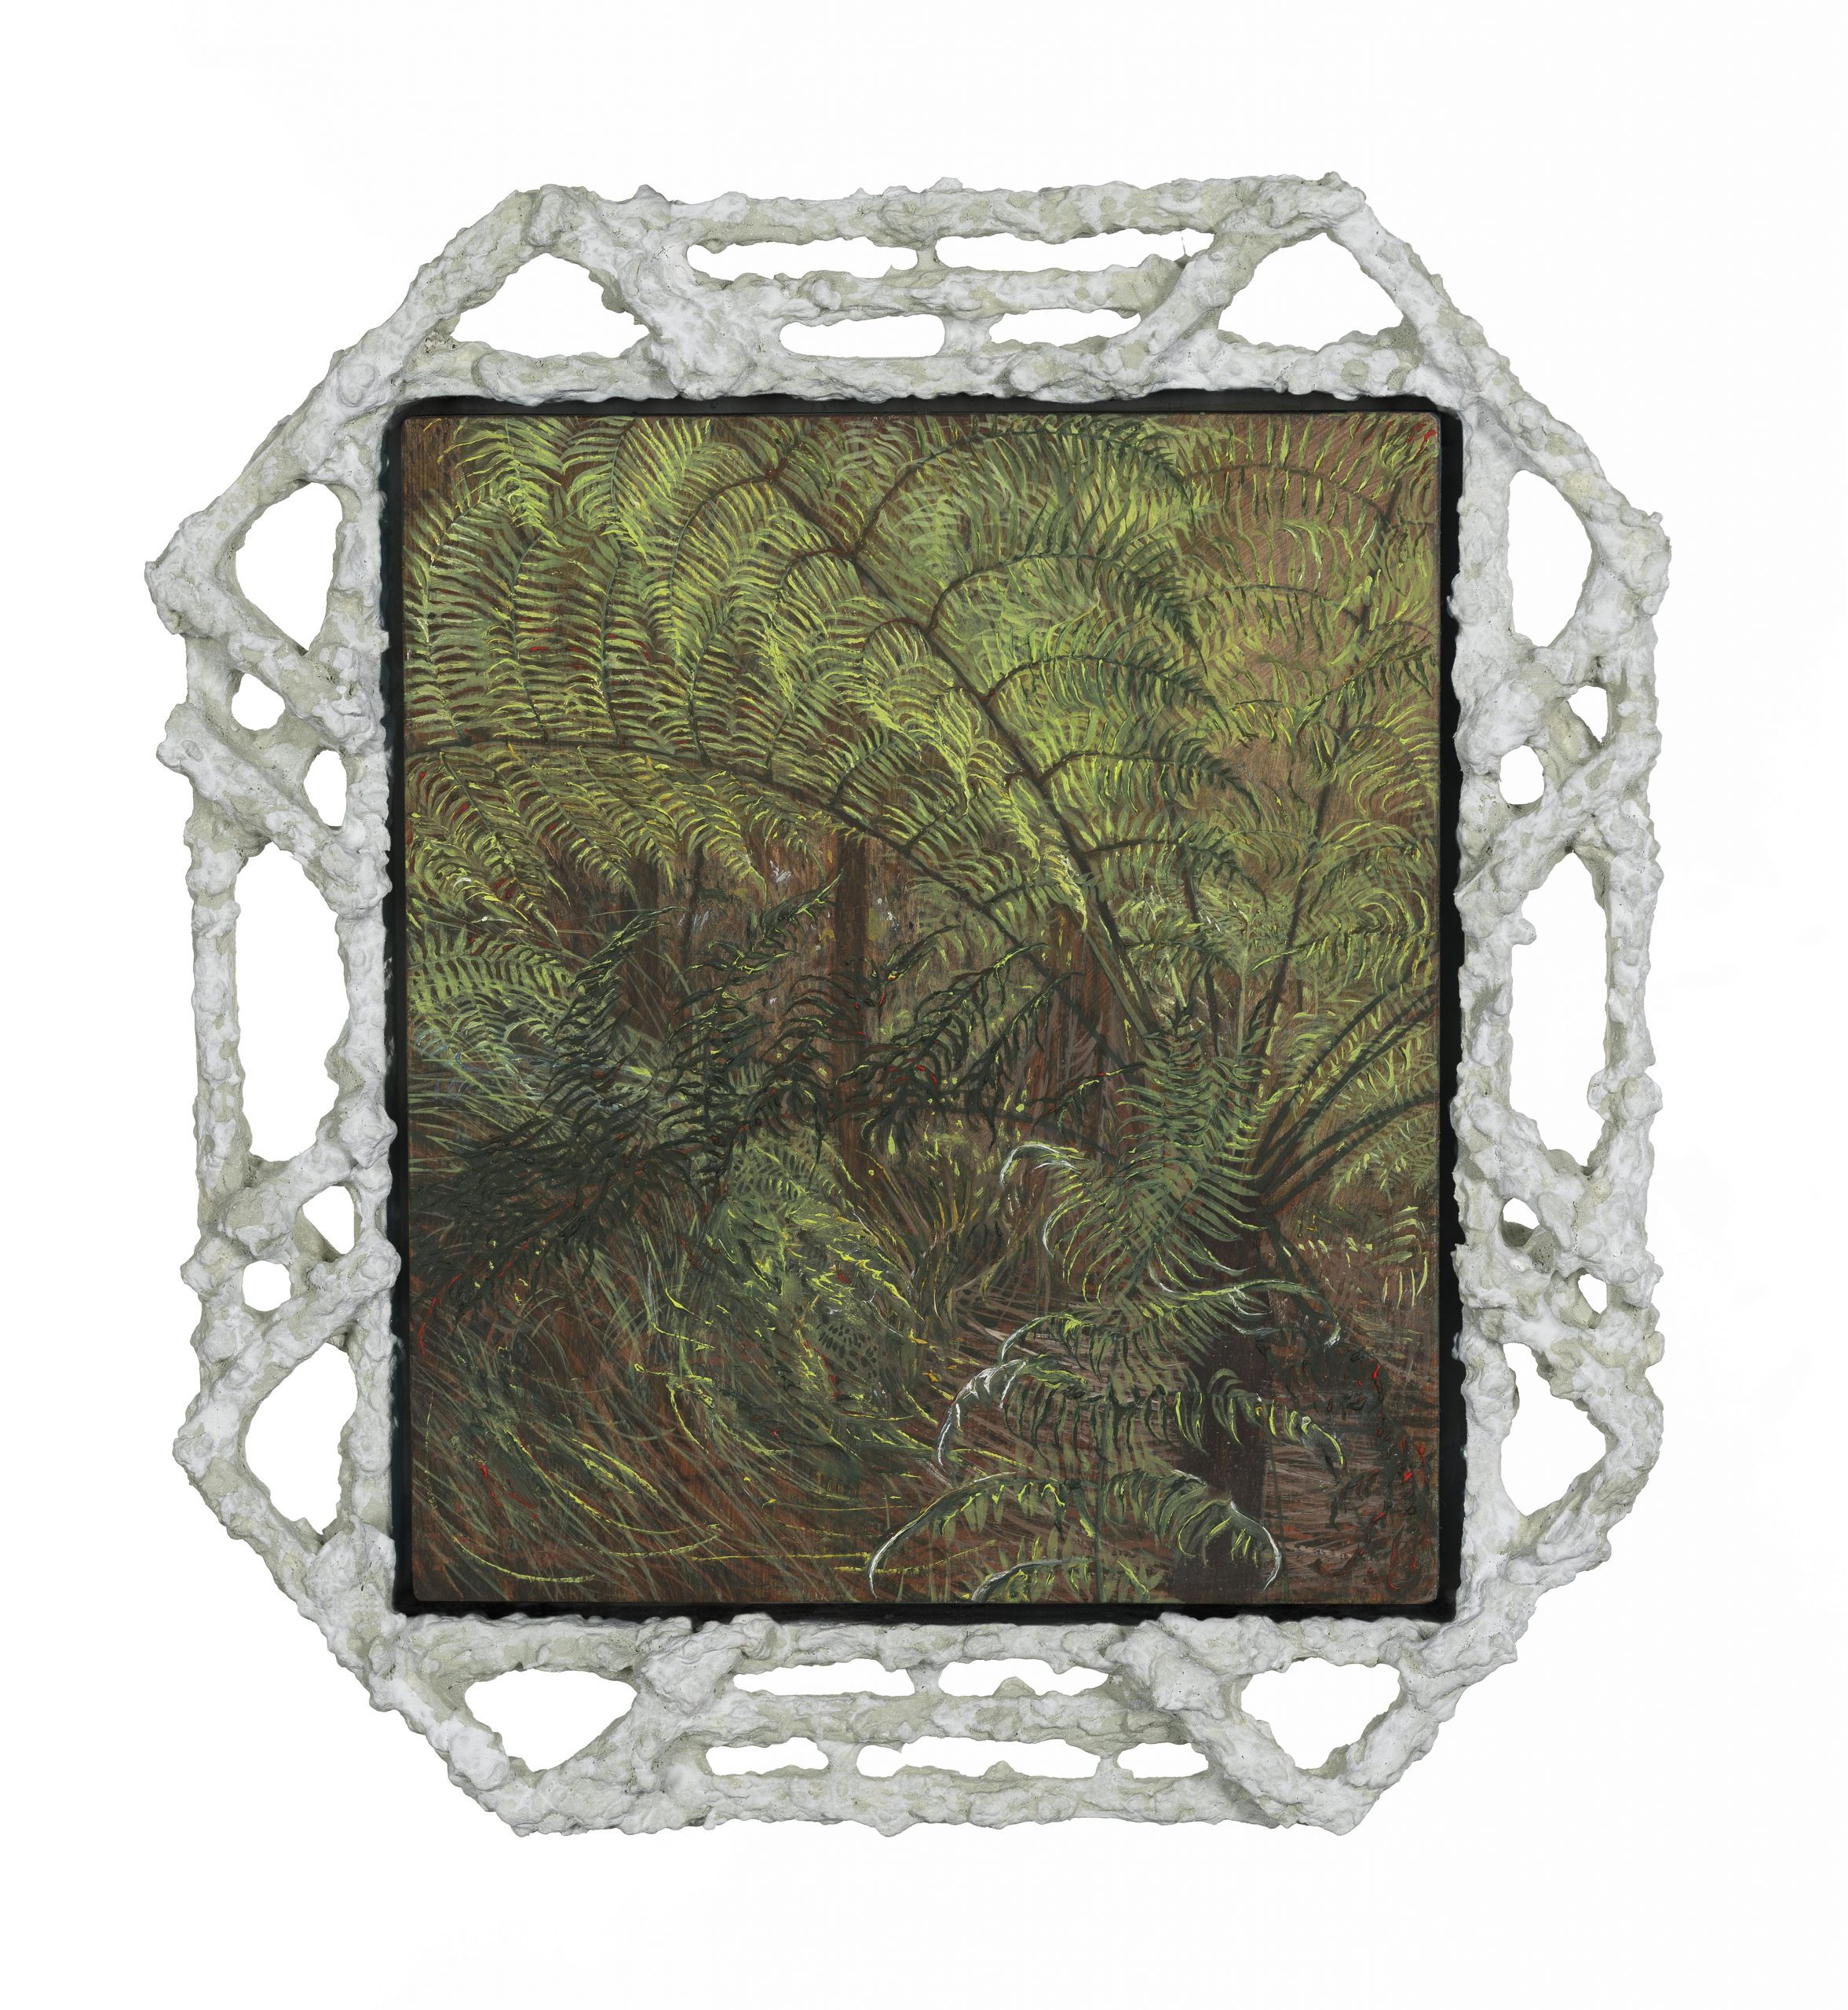 Fern Specimen 06 28x31cm Oil paint on board framed in timber paper pulp and cement